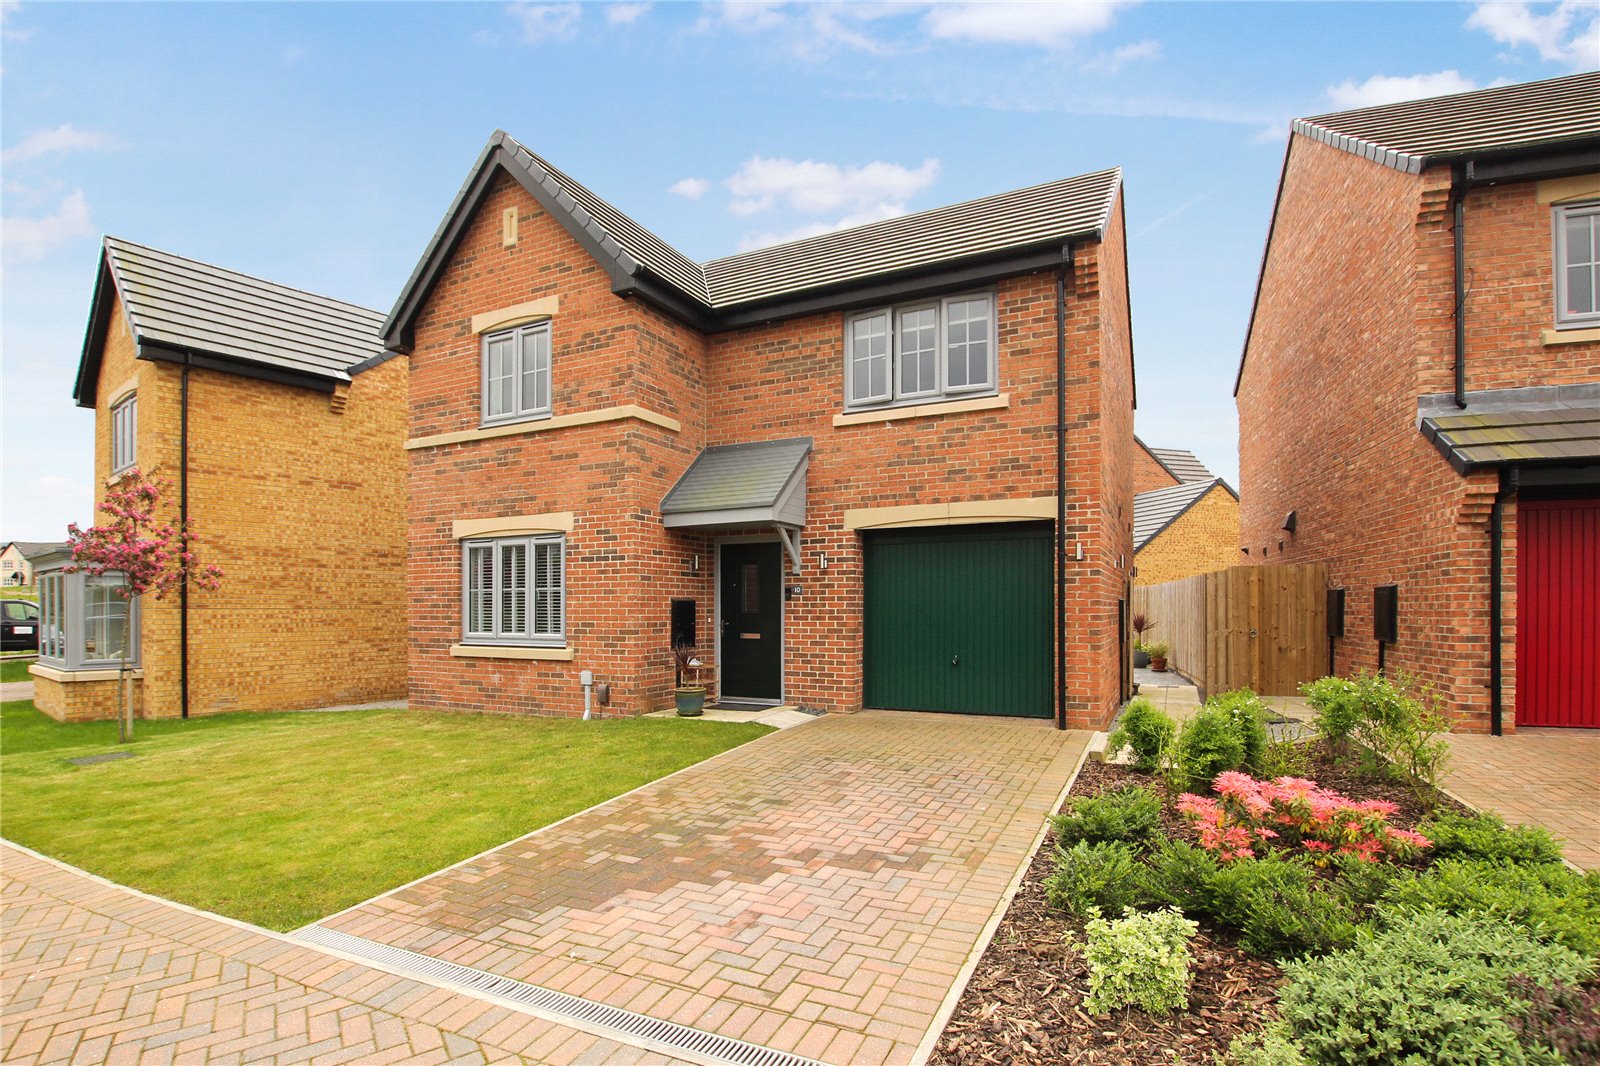 3 bed house for sale in Harvest Close, Stainsby Hall Farm  - Property Image 1